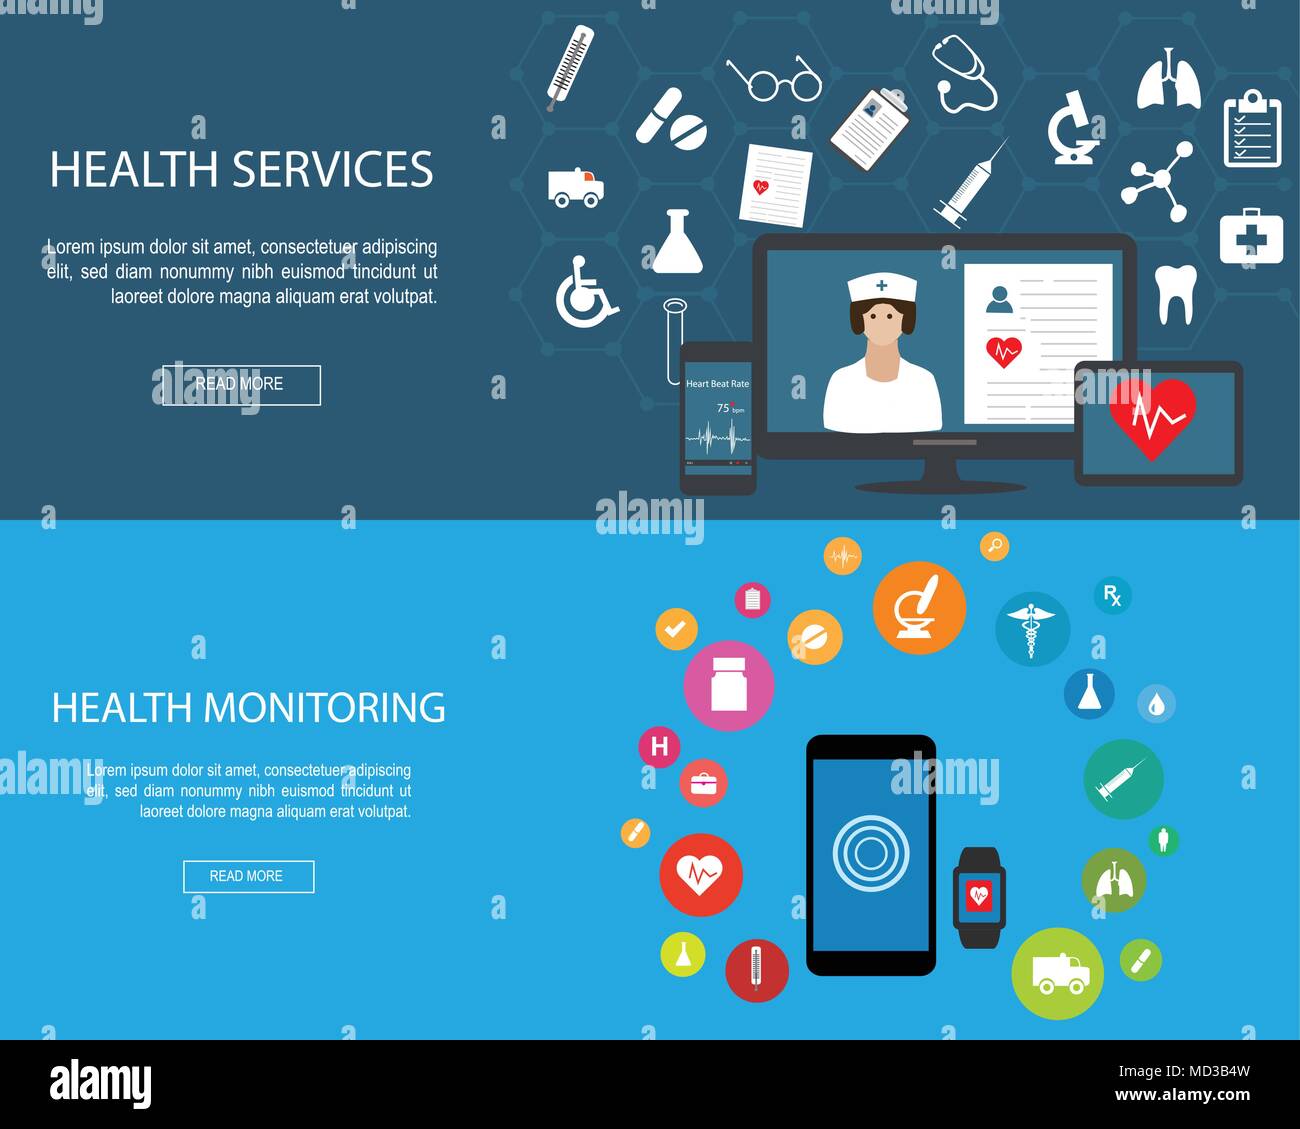 Flat designed banners for Health Services and Health Monitoring Stock Vector